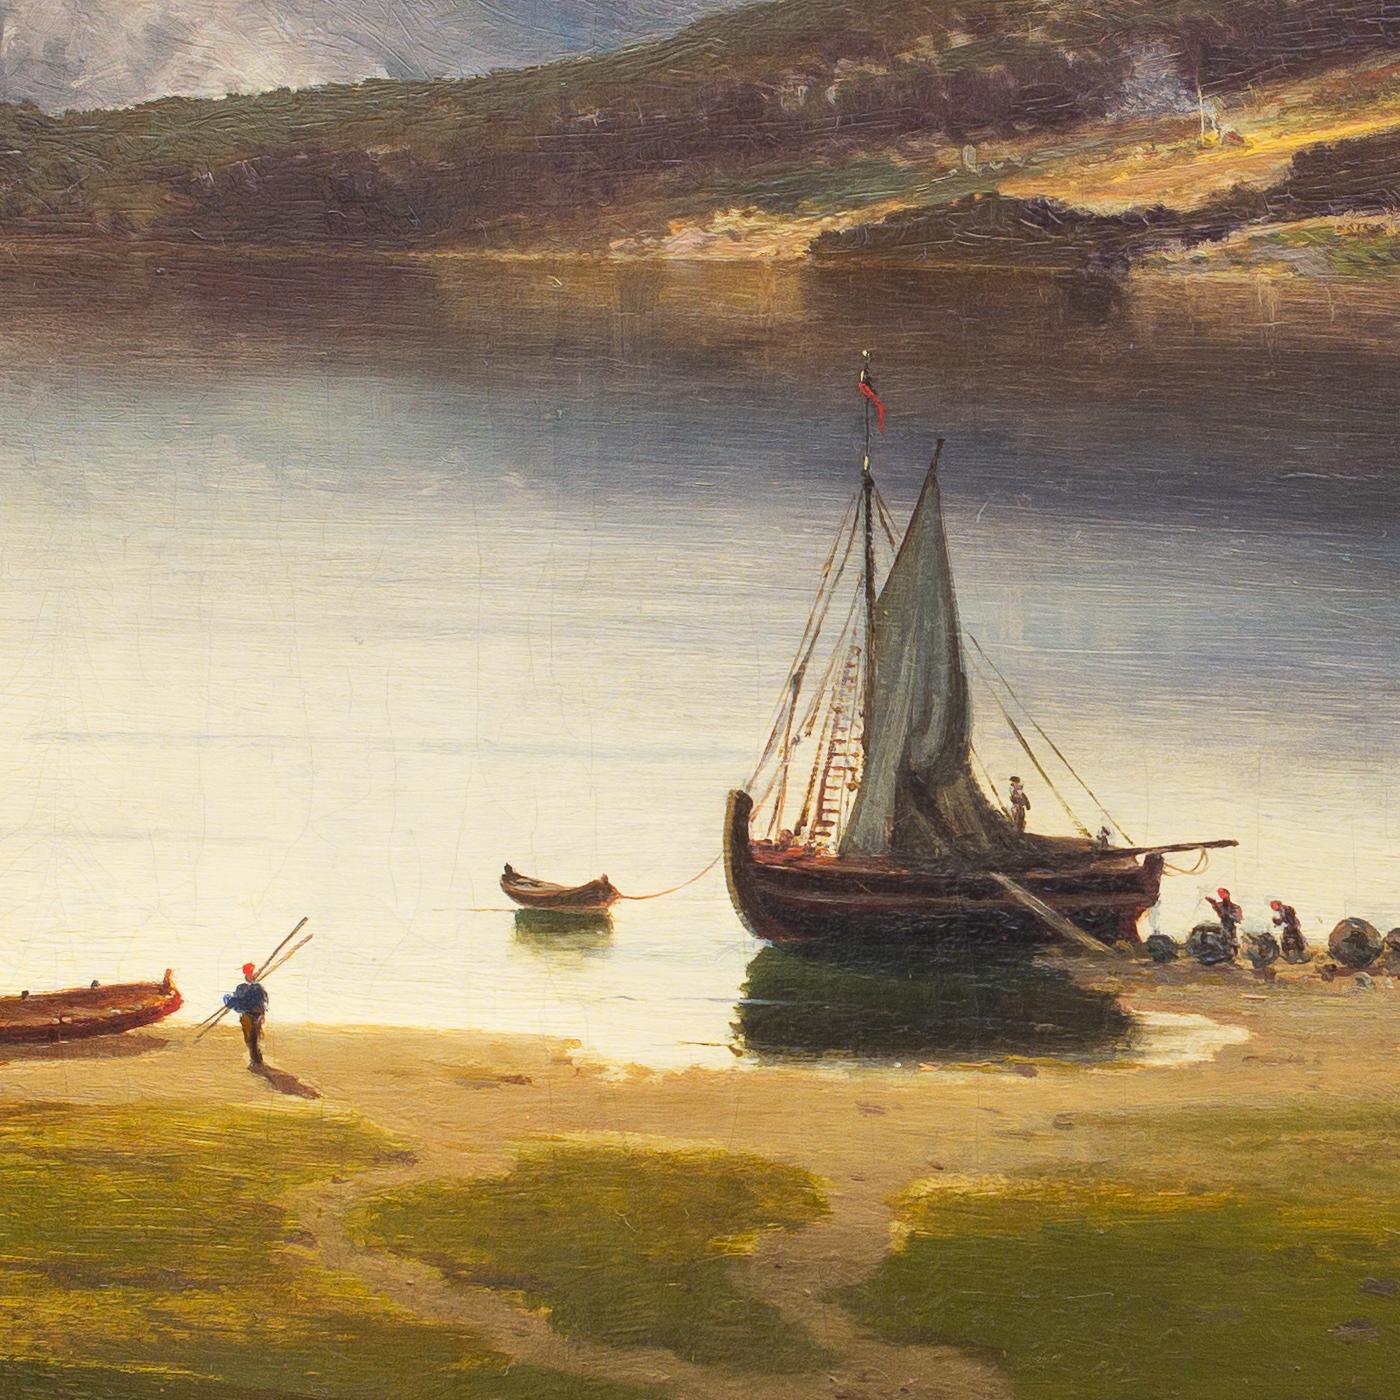 Setting Out in the Fjords 1858 by Swedish Artist Axel Nordgren, Oil on Canvas 4